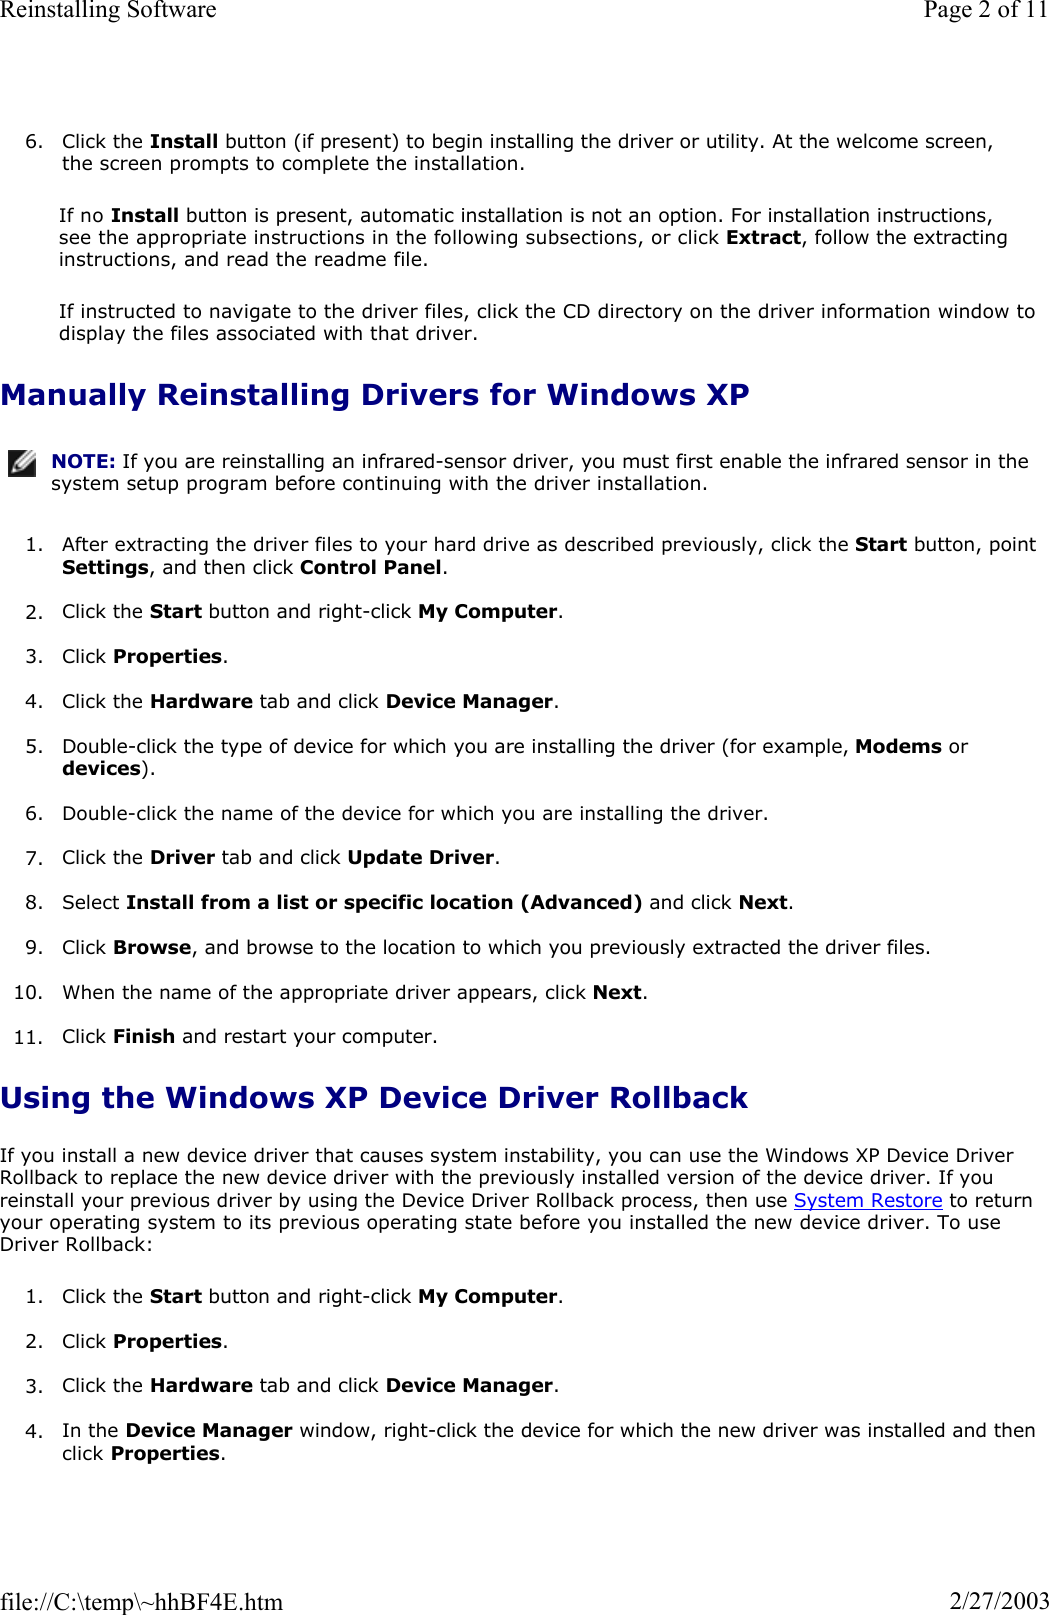 6. Click the Install button (if present) to begin installing the driver or utility. At the welcome screen, the screen prompts to complete the installation. If no Install button is present, automatic installation is not an option. For installation instructions, see the appropriate instructions in the following subsections, or click Extract, follow the extracting instructions, and read the readme file. If instructed to navigate to the driver files, click the CD directory on the driver information window to display the files associated with that driver. Manually Reinstalling Drivers for Windows XP1. After extracting the driver files to your hard drive as described previously, click the Start button, point Settings, and then click Control Panel.2. Click the Start button and right-click My Computer.3. Click Properties.4. Click the Hardware tab and click Device Manager.5. Double-click the type of device for which you are installing the driver (for example, Modems or devices).6. Double-click the name of the device for which you are installing the driver. 7. Click the Driver tab and click Update Driver.8. Select Install from a list or specific location (Advanced) and click Next.9. Click Browse, and browse to the location to which you previously extracted the driver files. 10. When the name of the appropriate driver appears, click Next.11. Click Finish and restart your computer. Using the Windows XP Device Driver Rollback If you install a new device driver that causes system instability, you can use the Windows XP Device Driver Rollback to replace the new device driver with the previously installed version of the device driver. If you reinstall your previous driver by using the Device Driver Rollback process, then use System Restore to return your operating system to its previous operating state before you installed the new device driver. To use Driver Rollback: 1. Click the Start button and right-click My Computer.2. Click Properties.3. Click the Hardware tab and click Device Manager.4. In the Device Manager window, right-click the device for which the new driver was installed and then click Properties.NOTE: If you are reinstalling an infrared-sensor driver, you must first enable the infrared sensor in the system setup program before continuing with the driver installation.Page 2 of 11Reinstalling Software2/27/2003file://C:\temp\~hhBF4E.htm